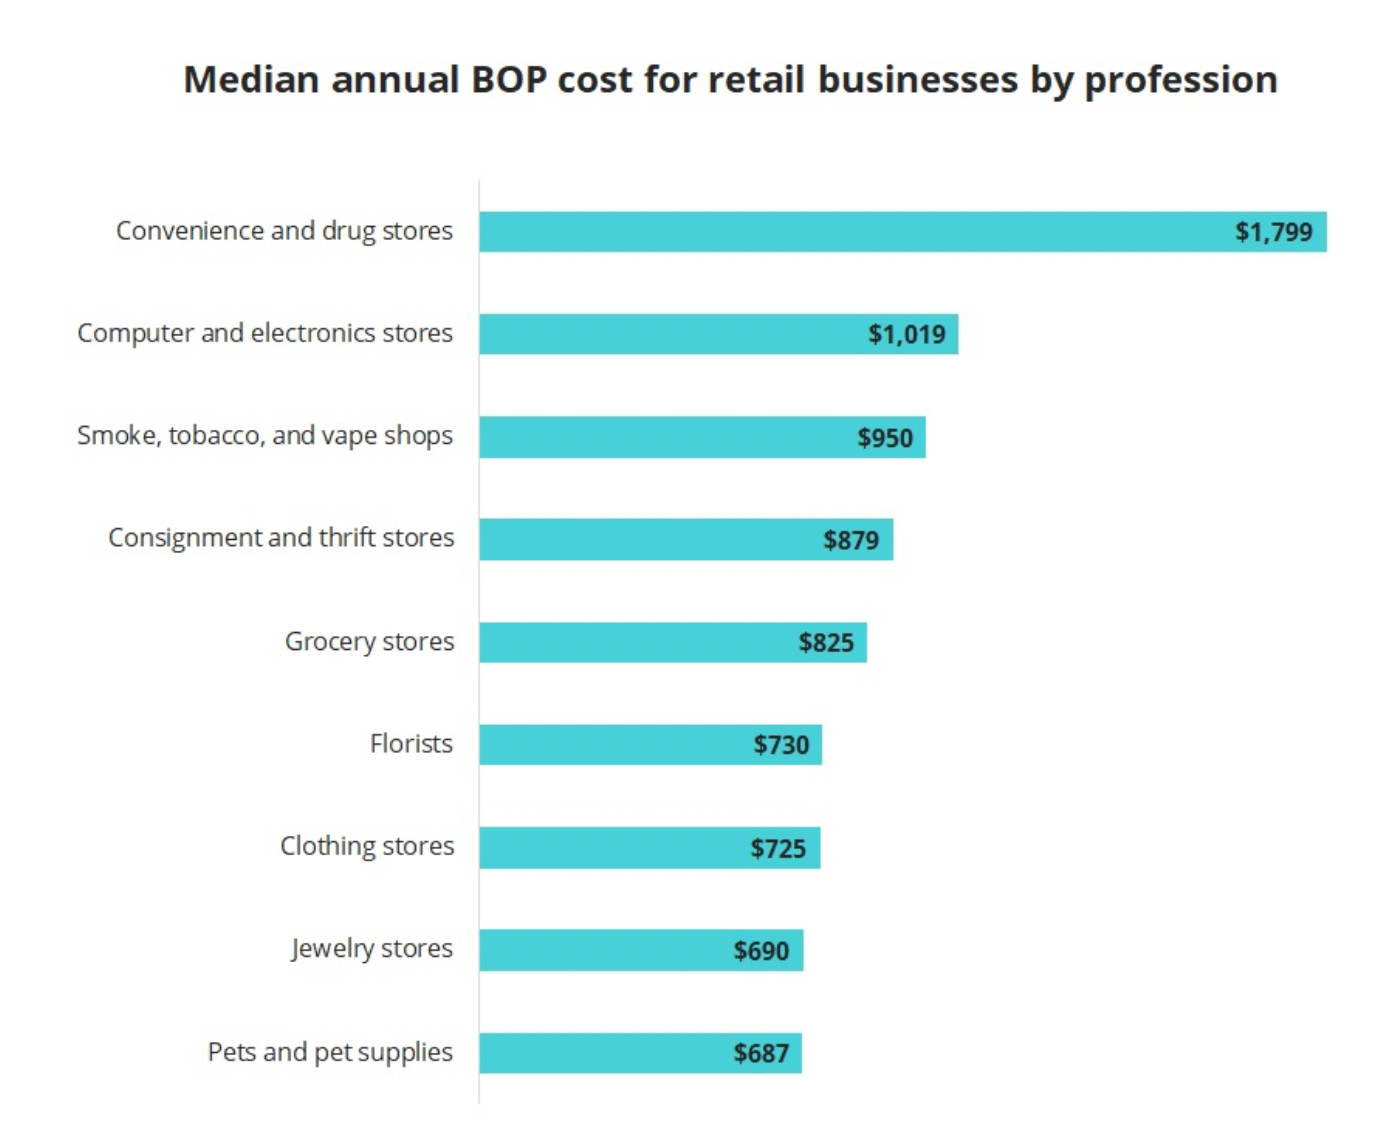 Insureon blue bar chart showing median annual BOP cost for retail businesses for 9 profession types.